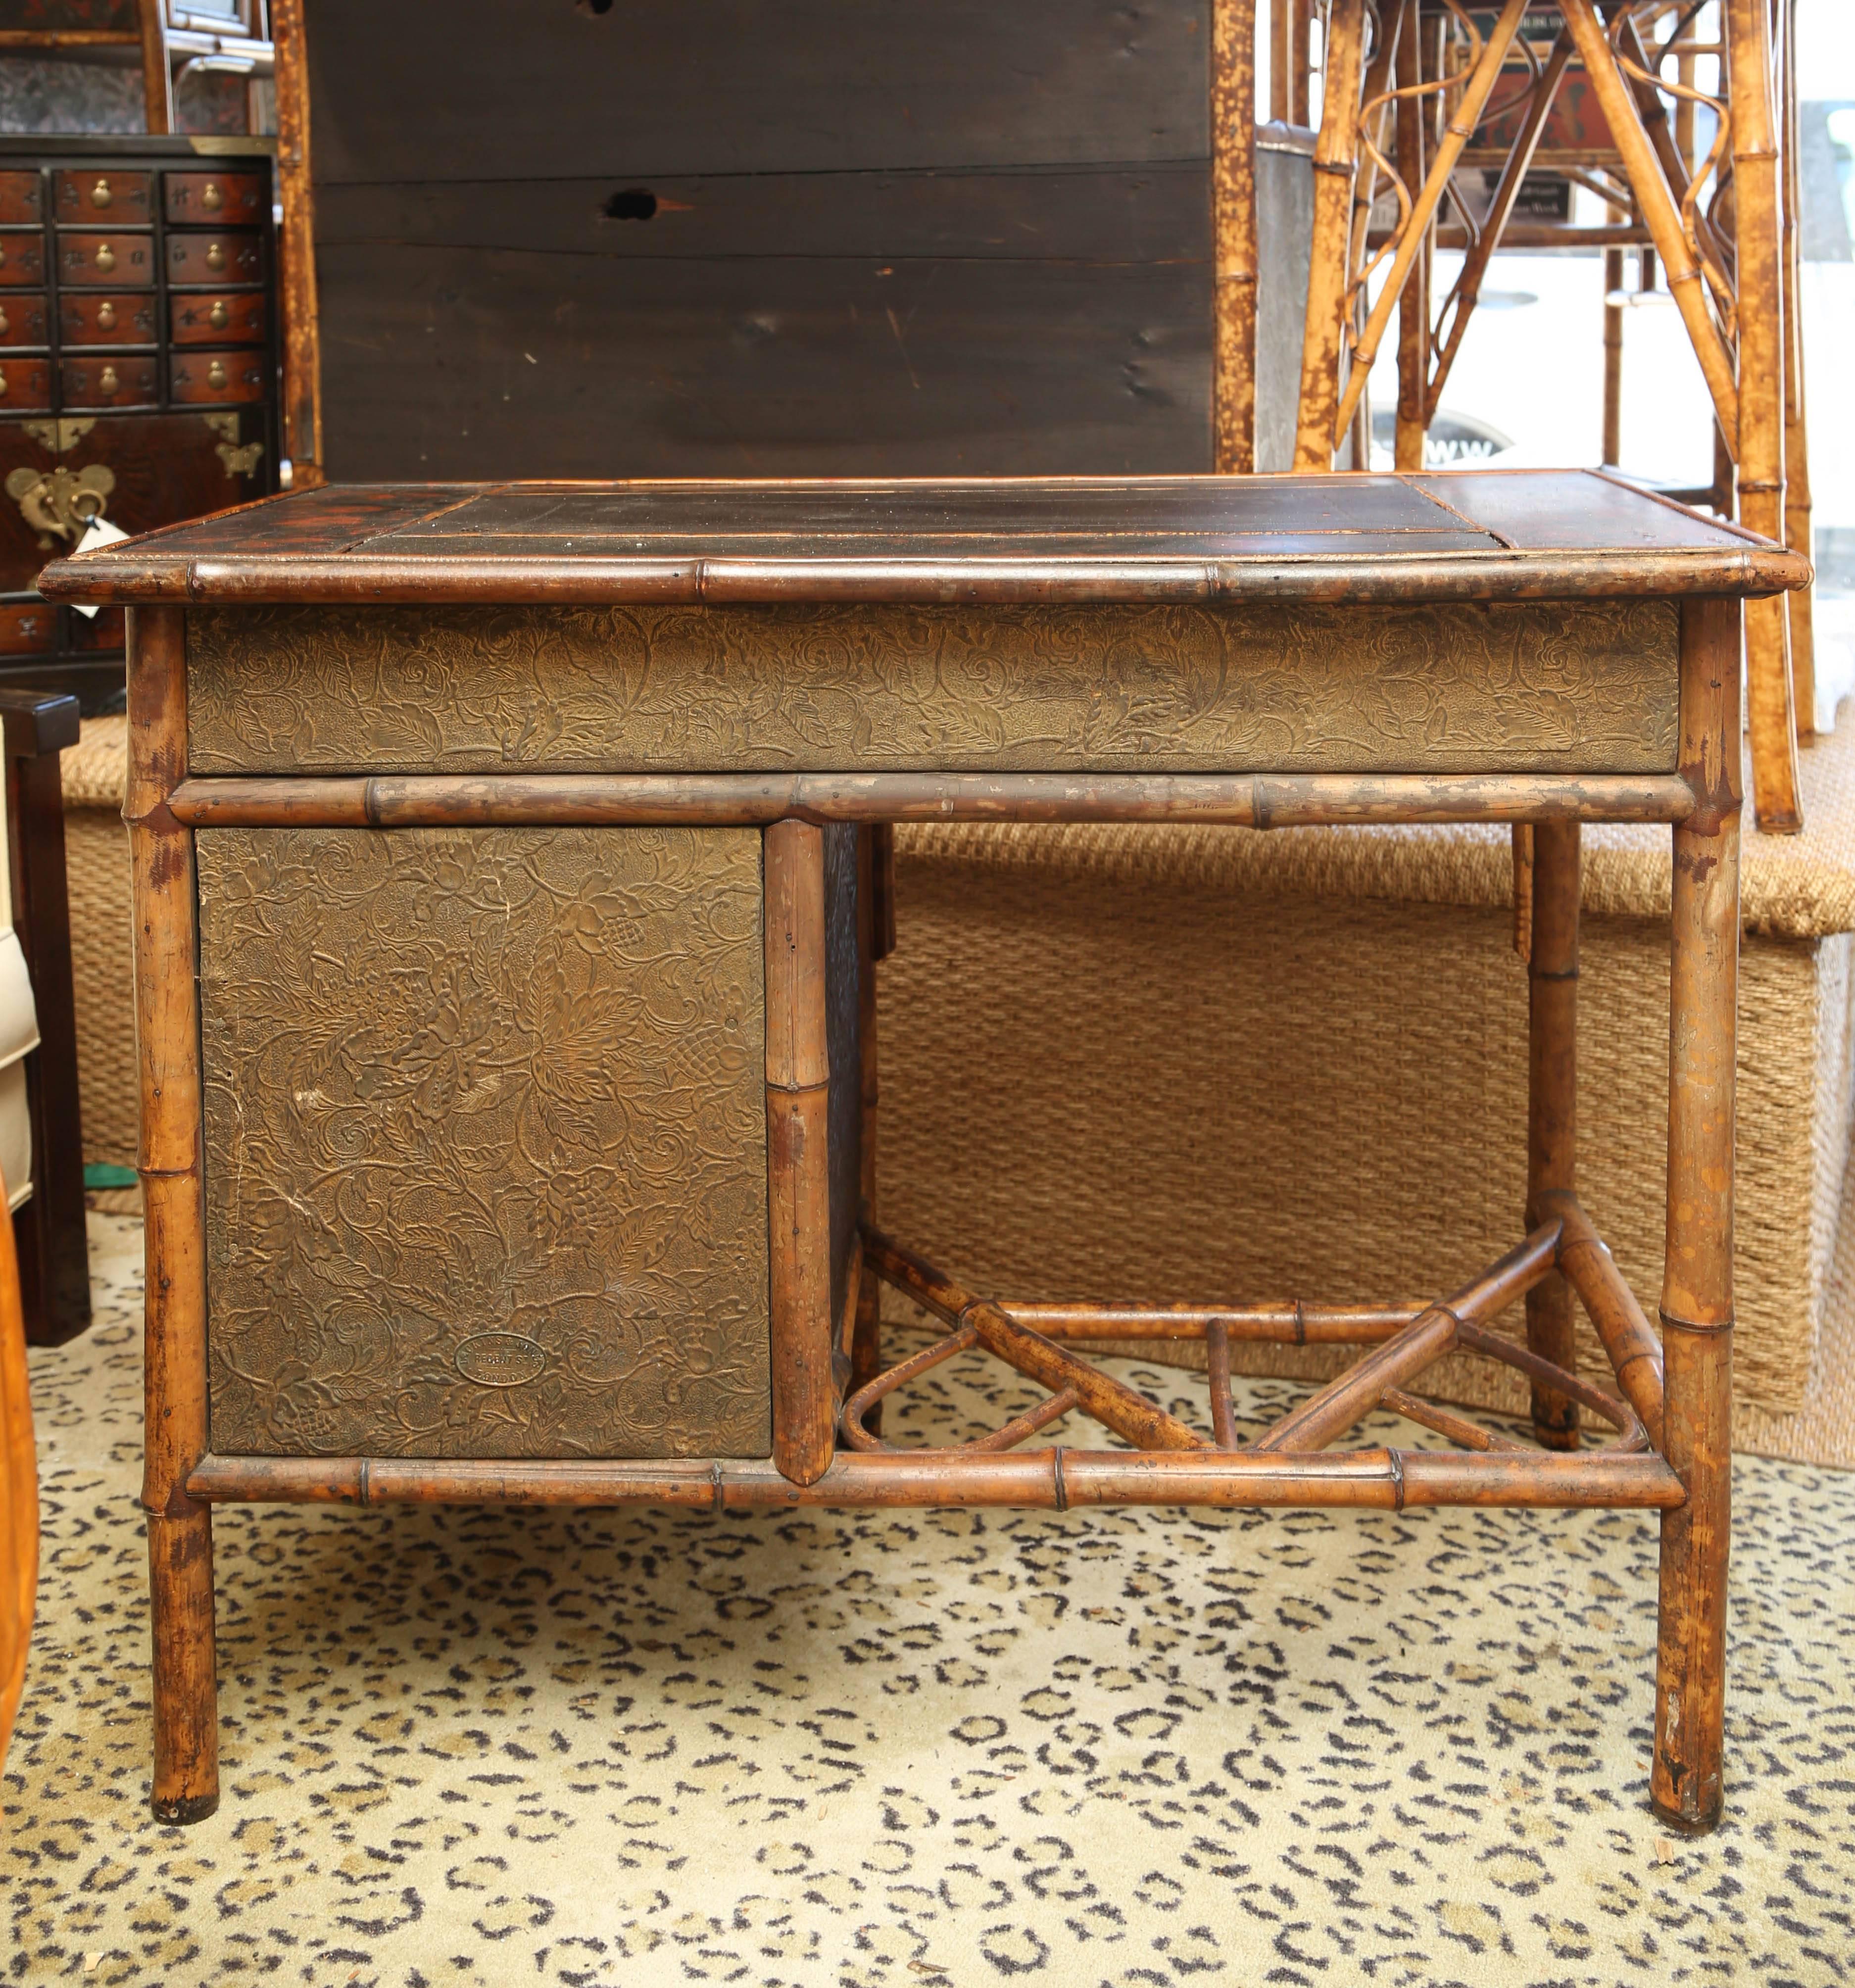 19th century English Bamboo desk with five drawers, leather top and japanning.